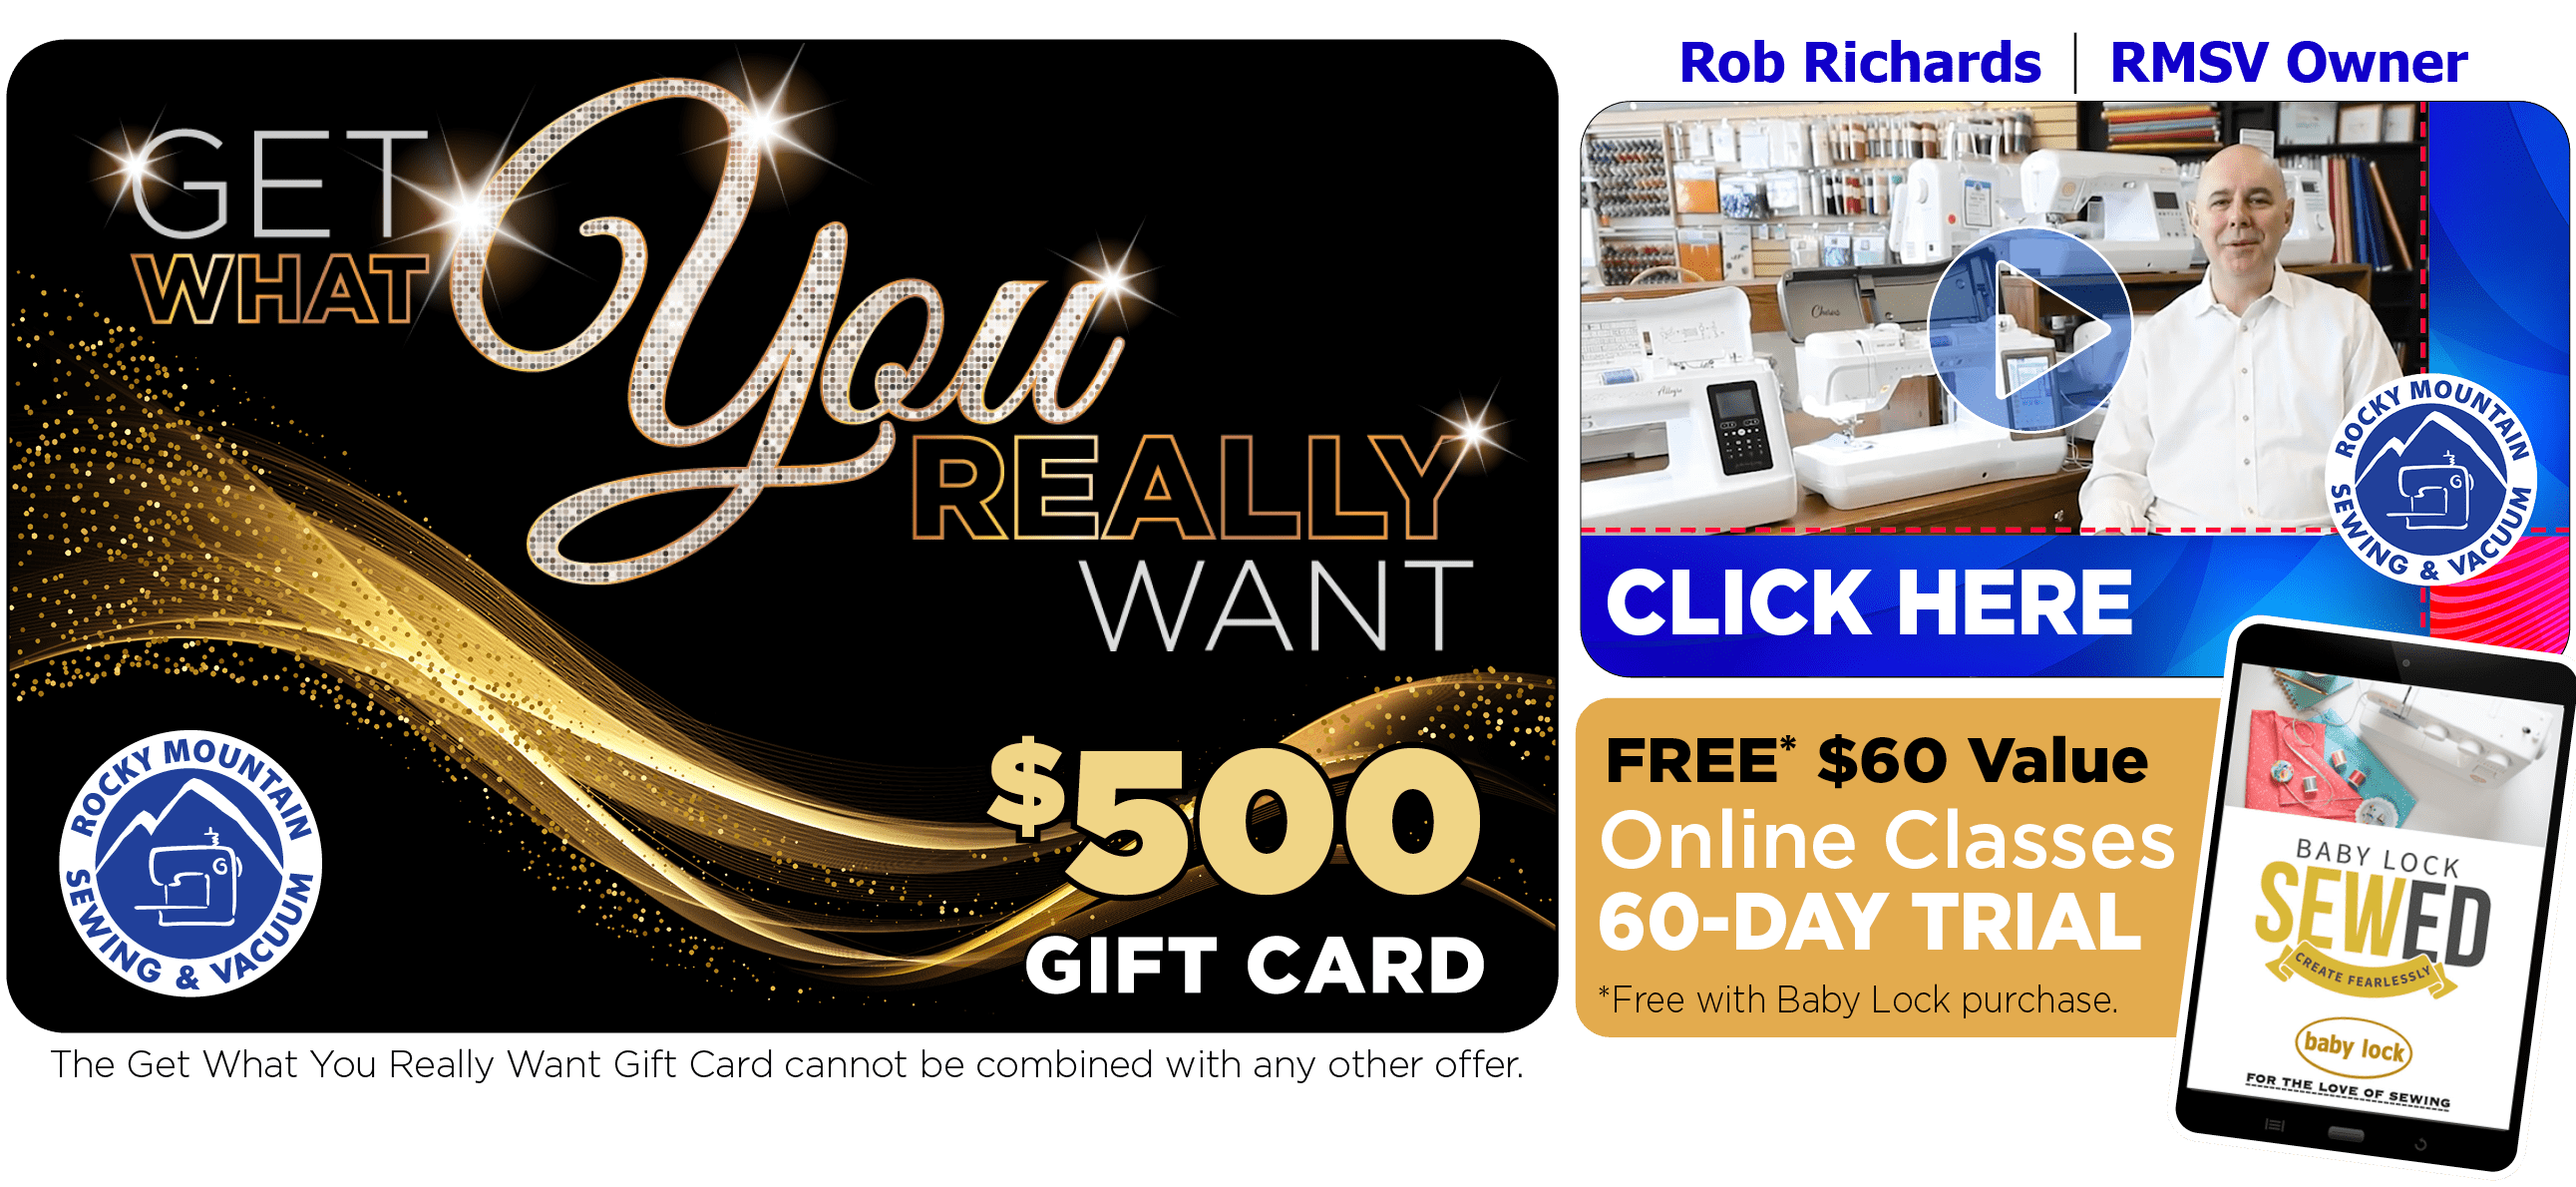 Get What You Really Want $500 Gift Card with Purchase